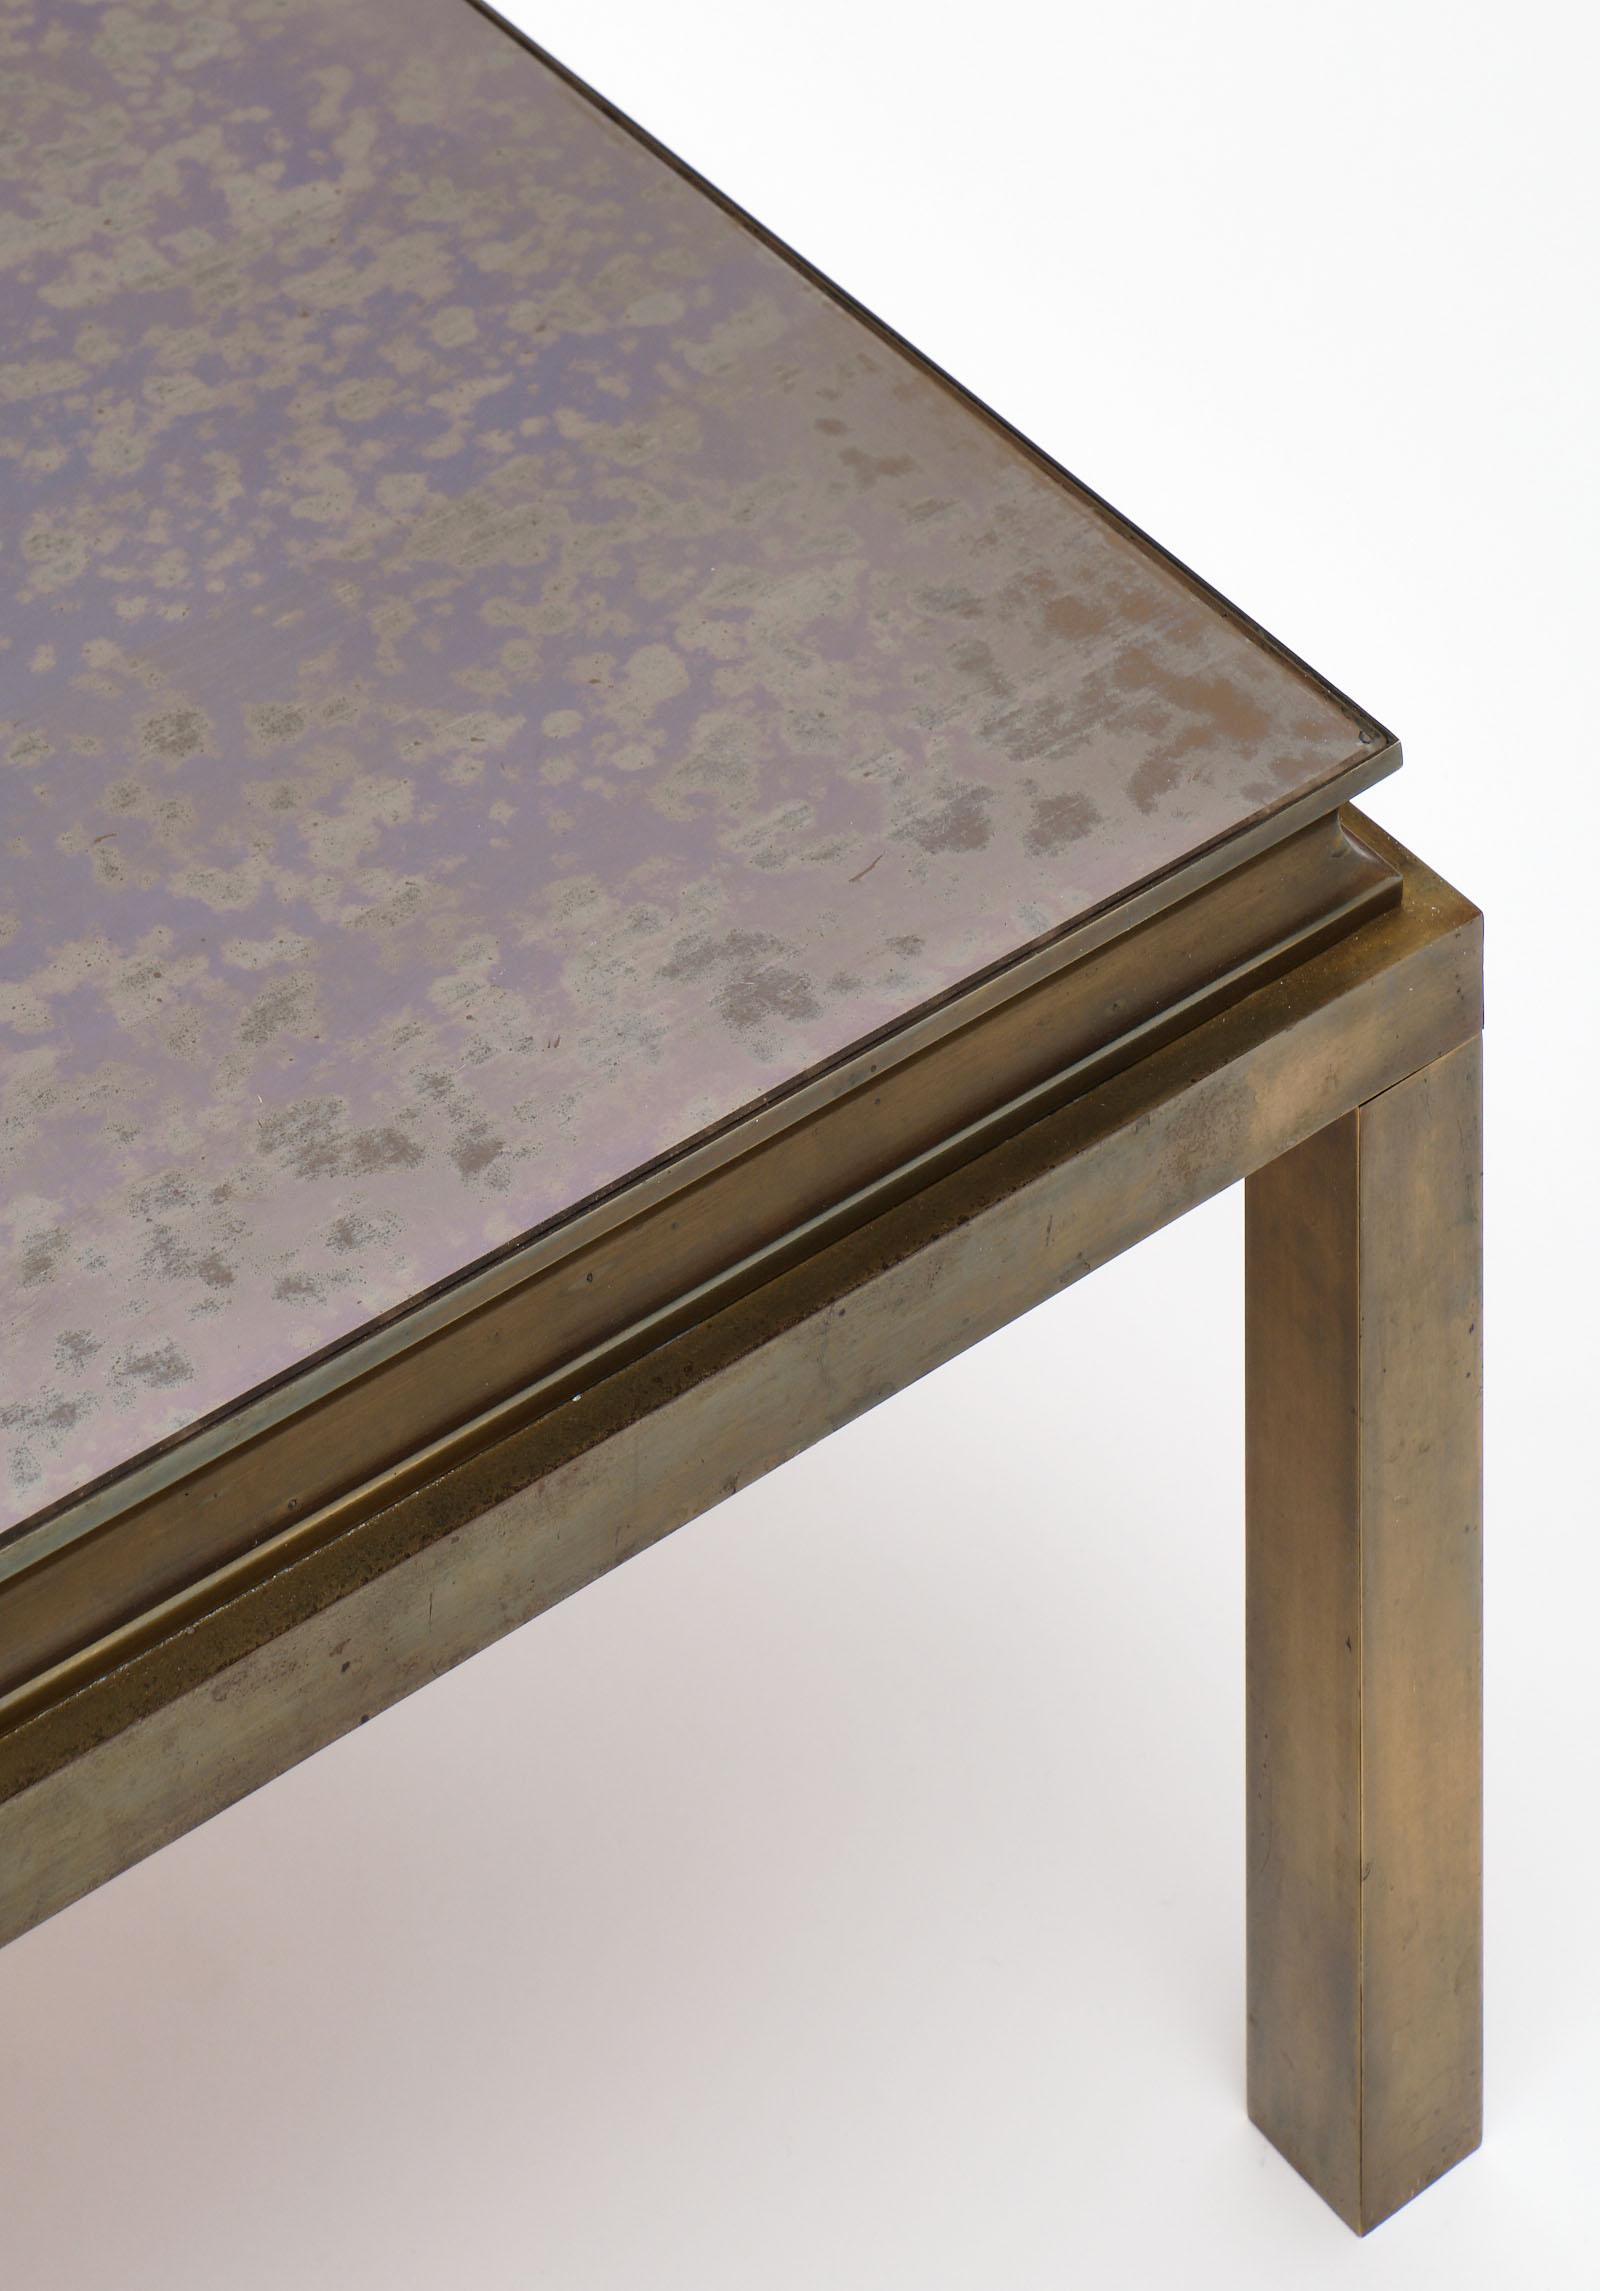 French vintage brass coffee table with a patinated solid brass base and the original eglomised gold glass top. We love this solid, impressive piece!